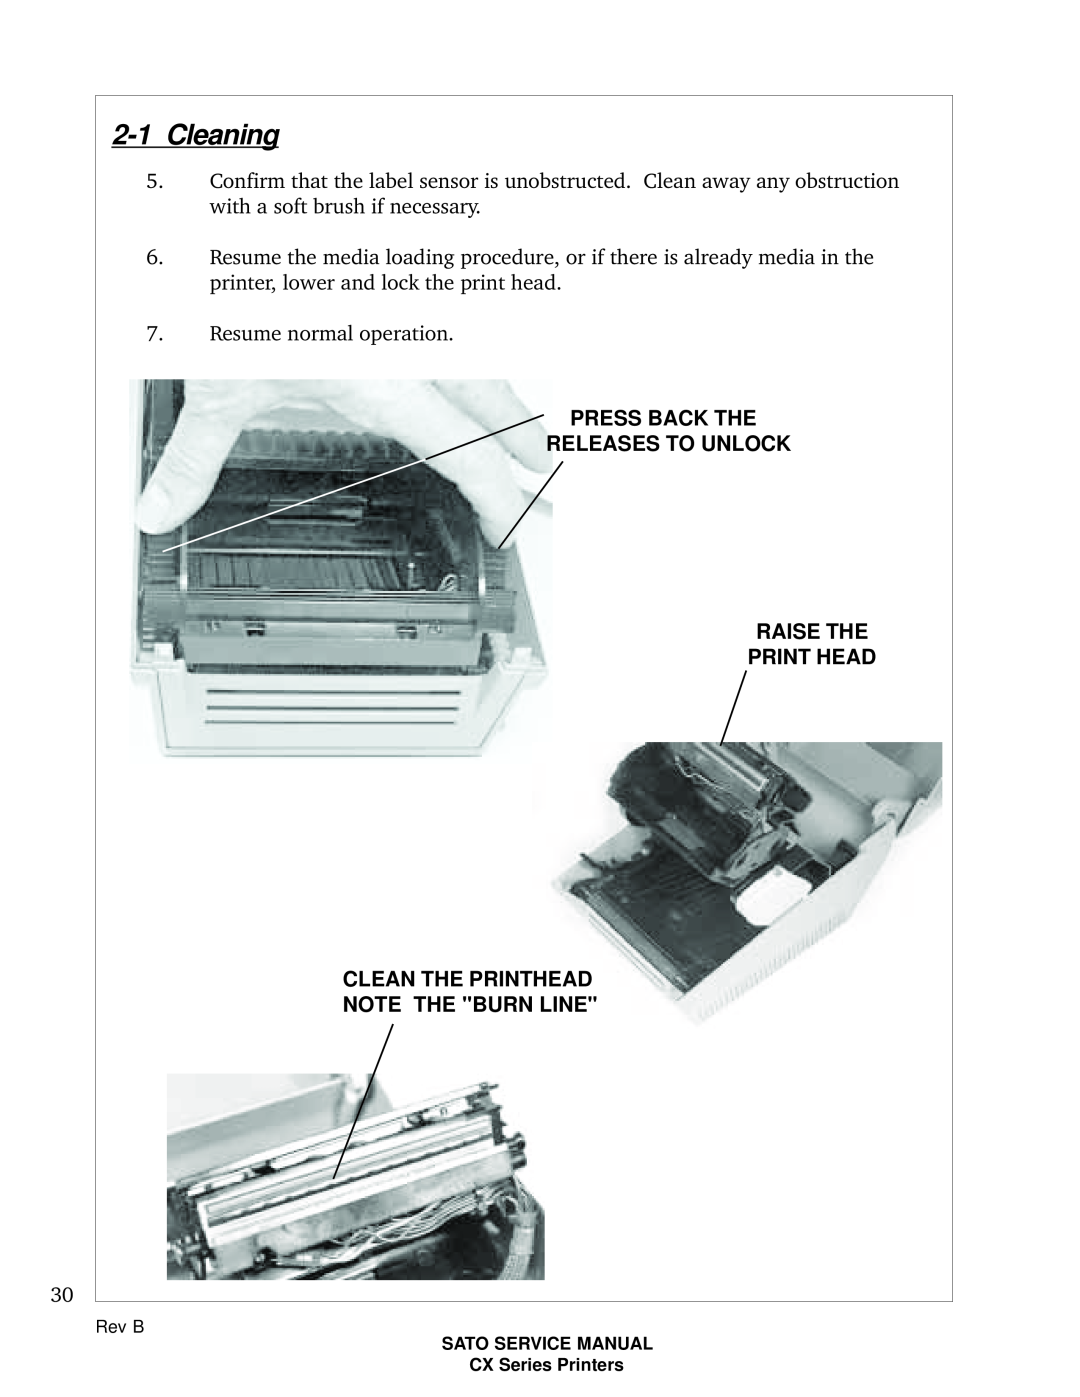 SATO CX200 manual Press Back The Releases To Unlock Raise The Print Head, Clean The Printhead Note The Burn Line, Cleaning 